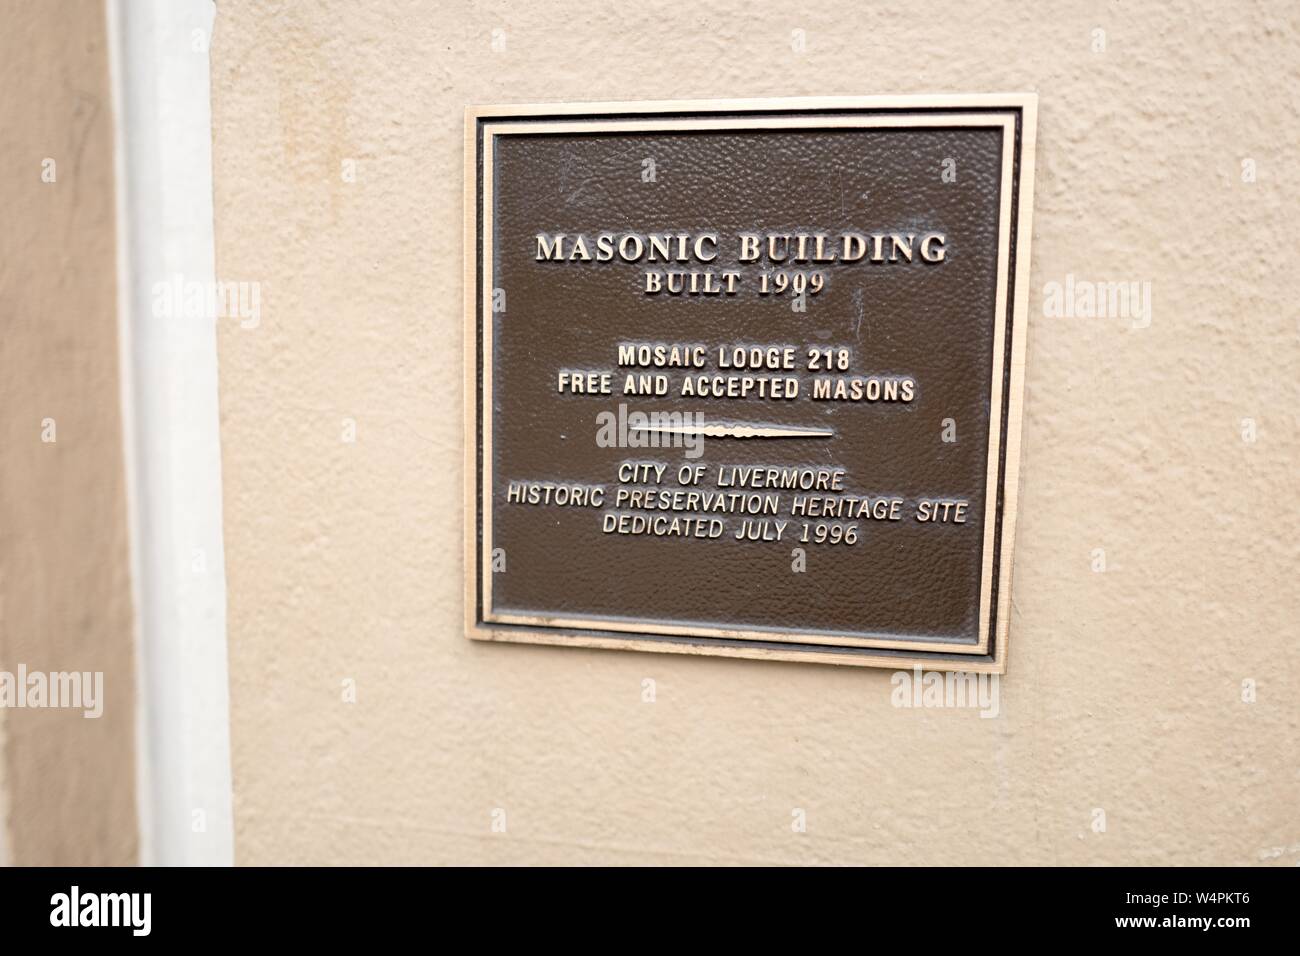 Historical marker for the Masonic Lodge 218, originally built in 1909, on First Street in downtown Livermore, California, October 3, 2018. () Stock Photo